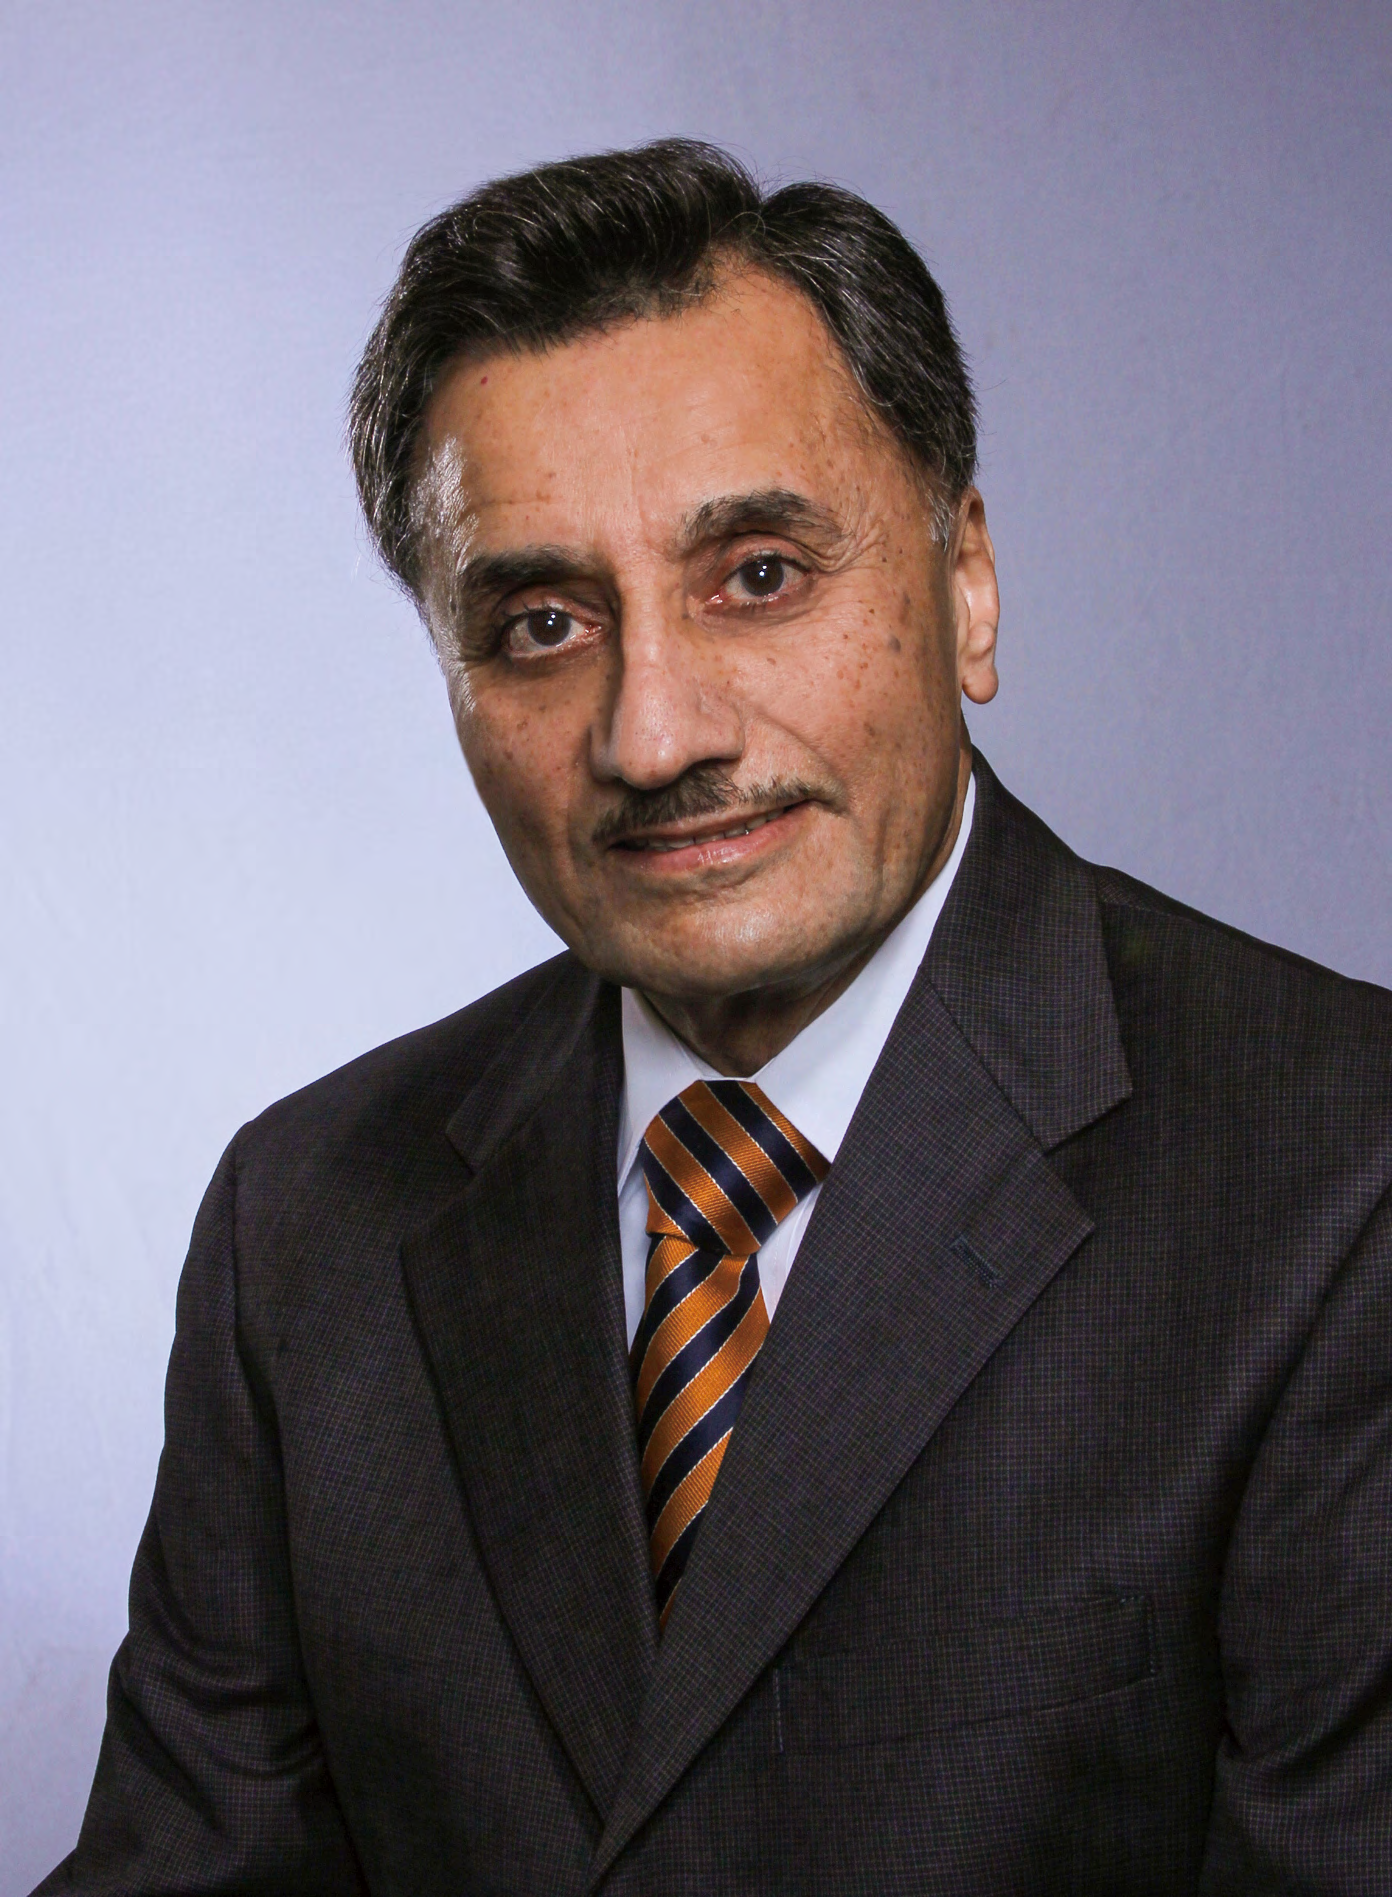 Interview with Mr. S. Joe Bhatia, ANSI President and CEO